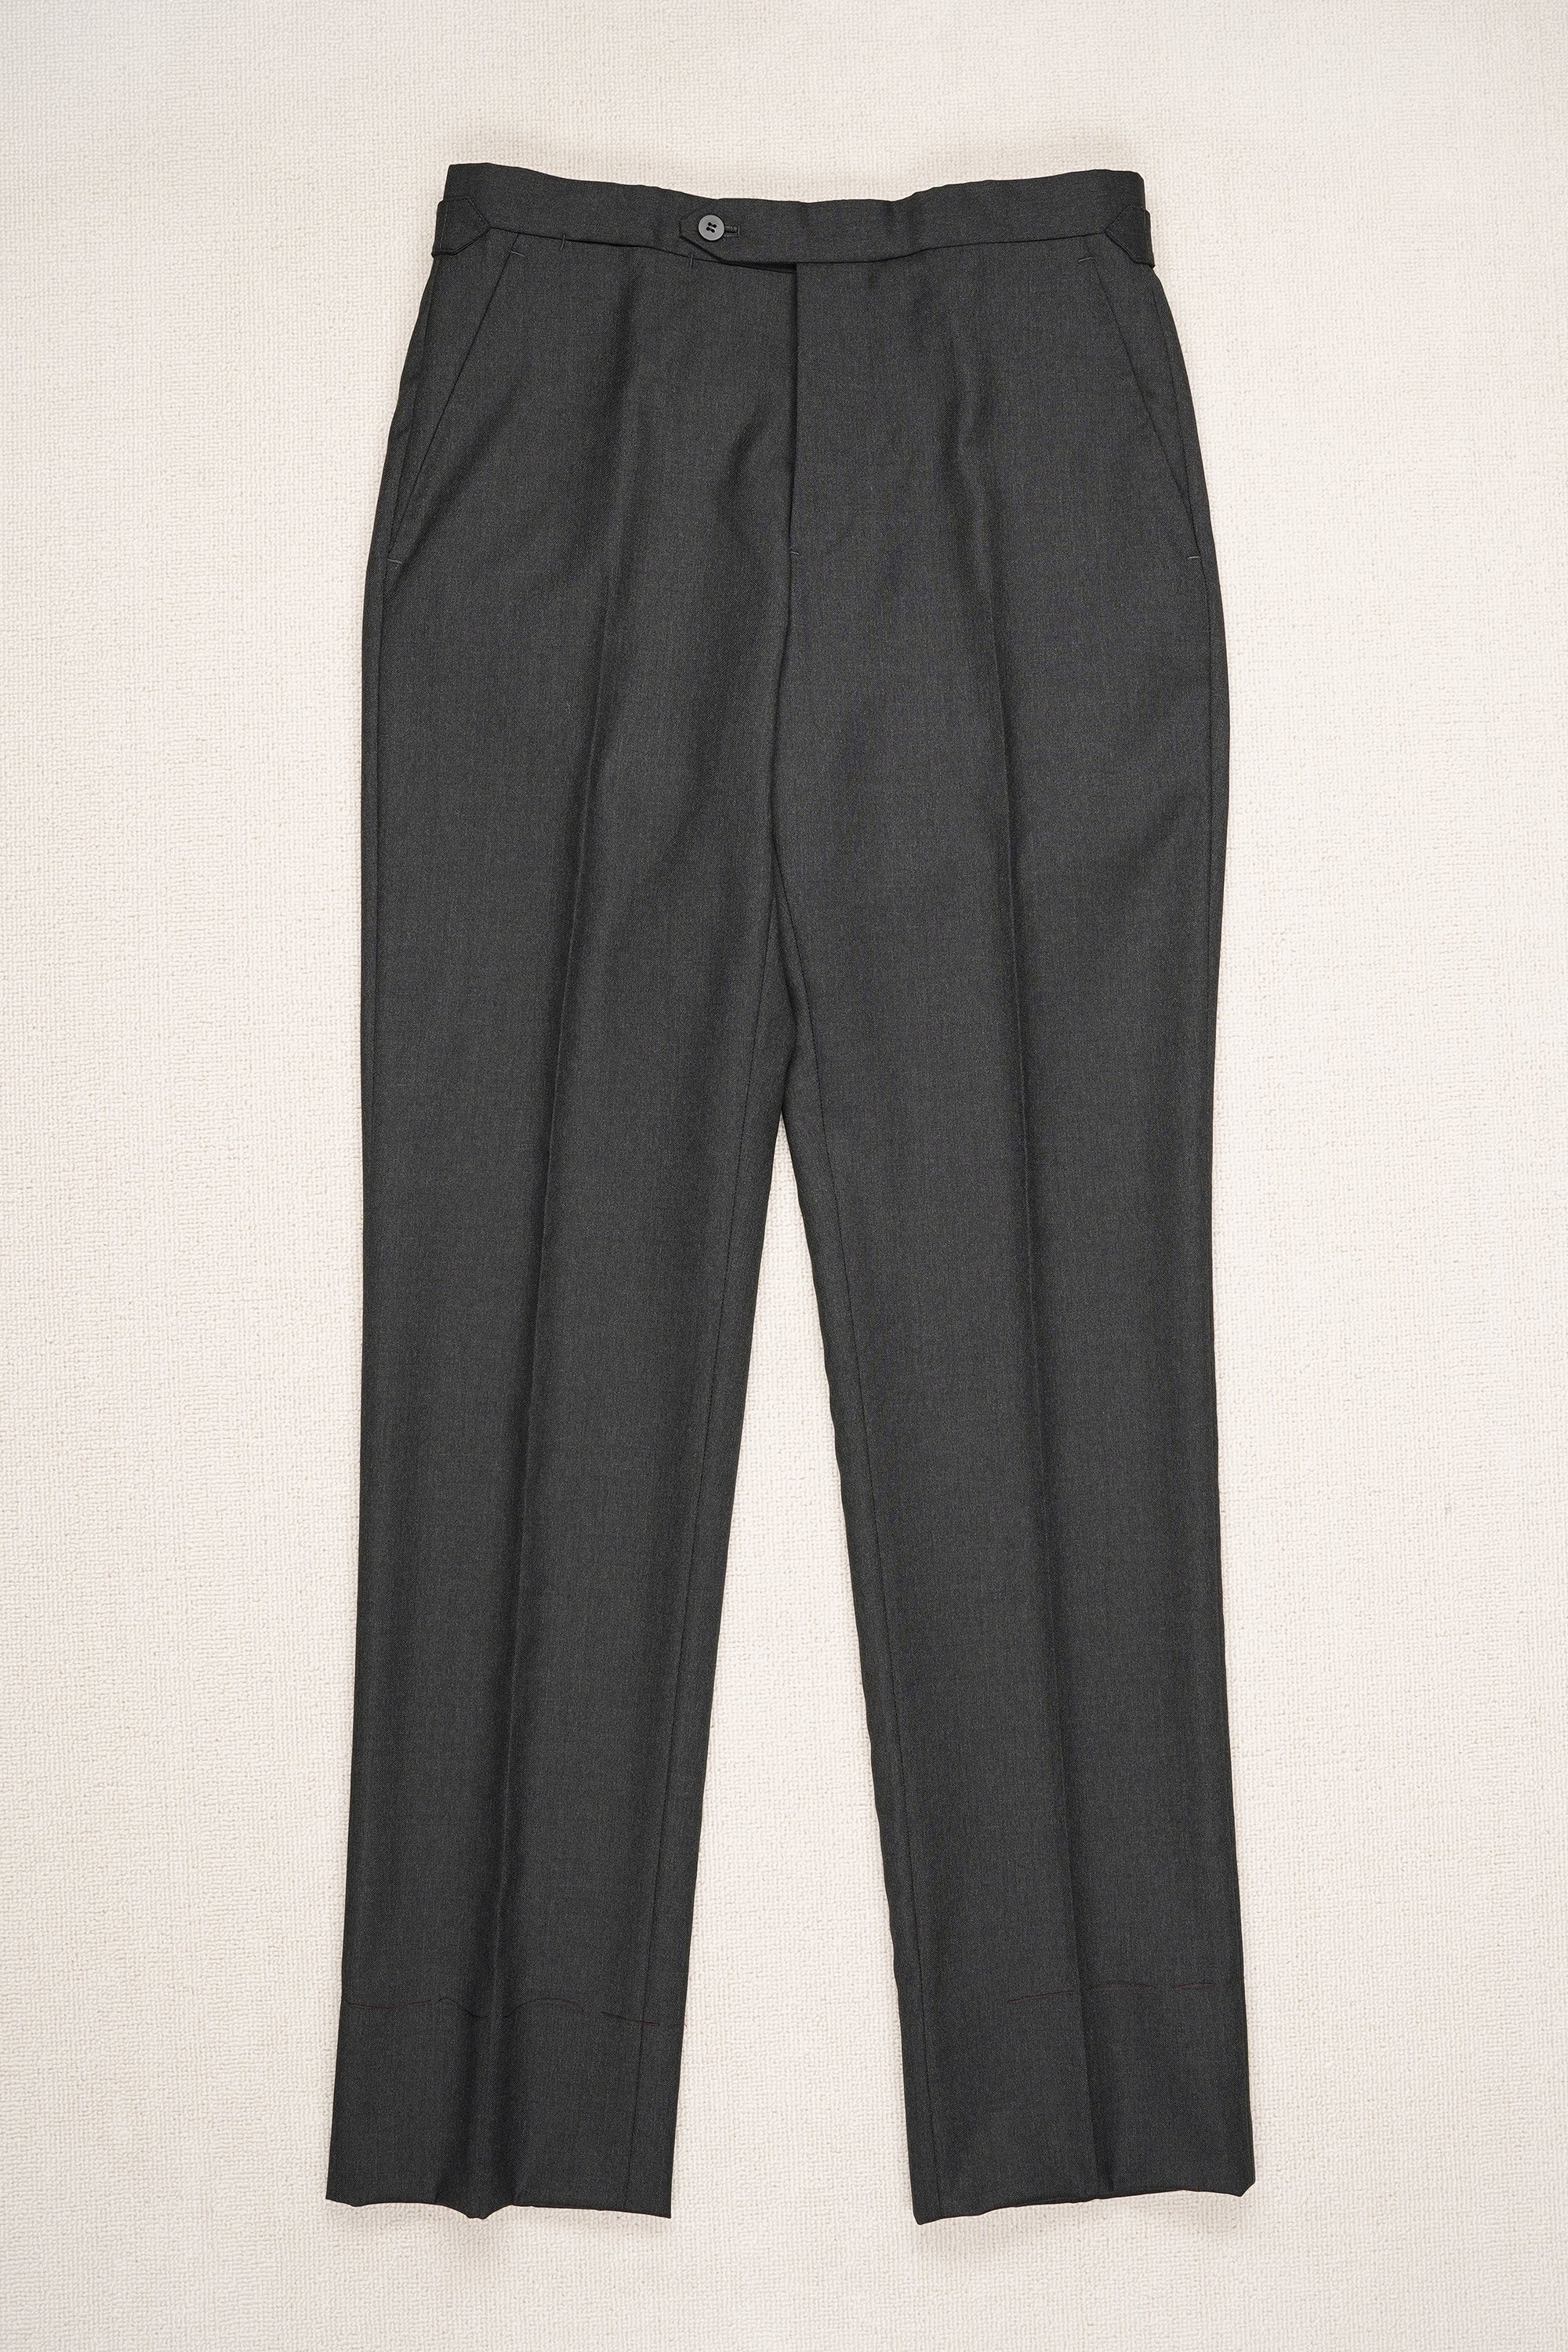 The Armoury Model 101 Grey Super 110 Wool Suit